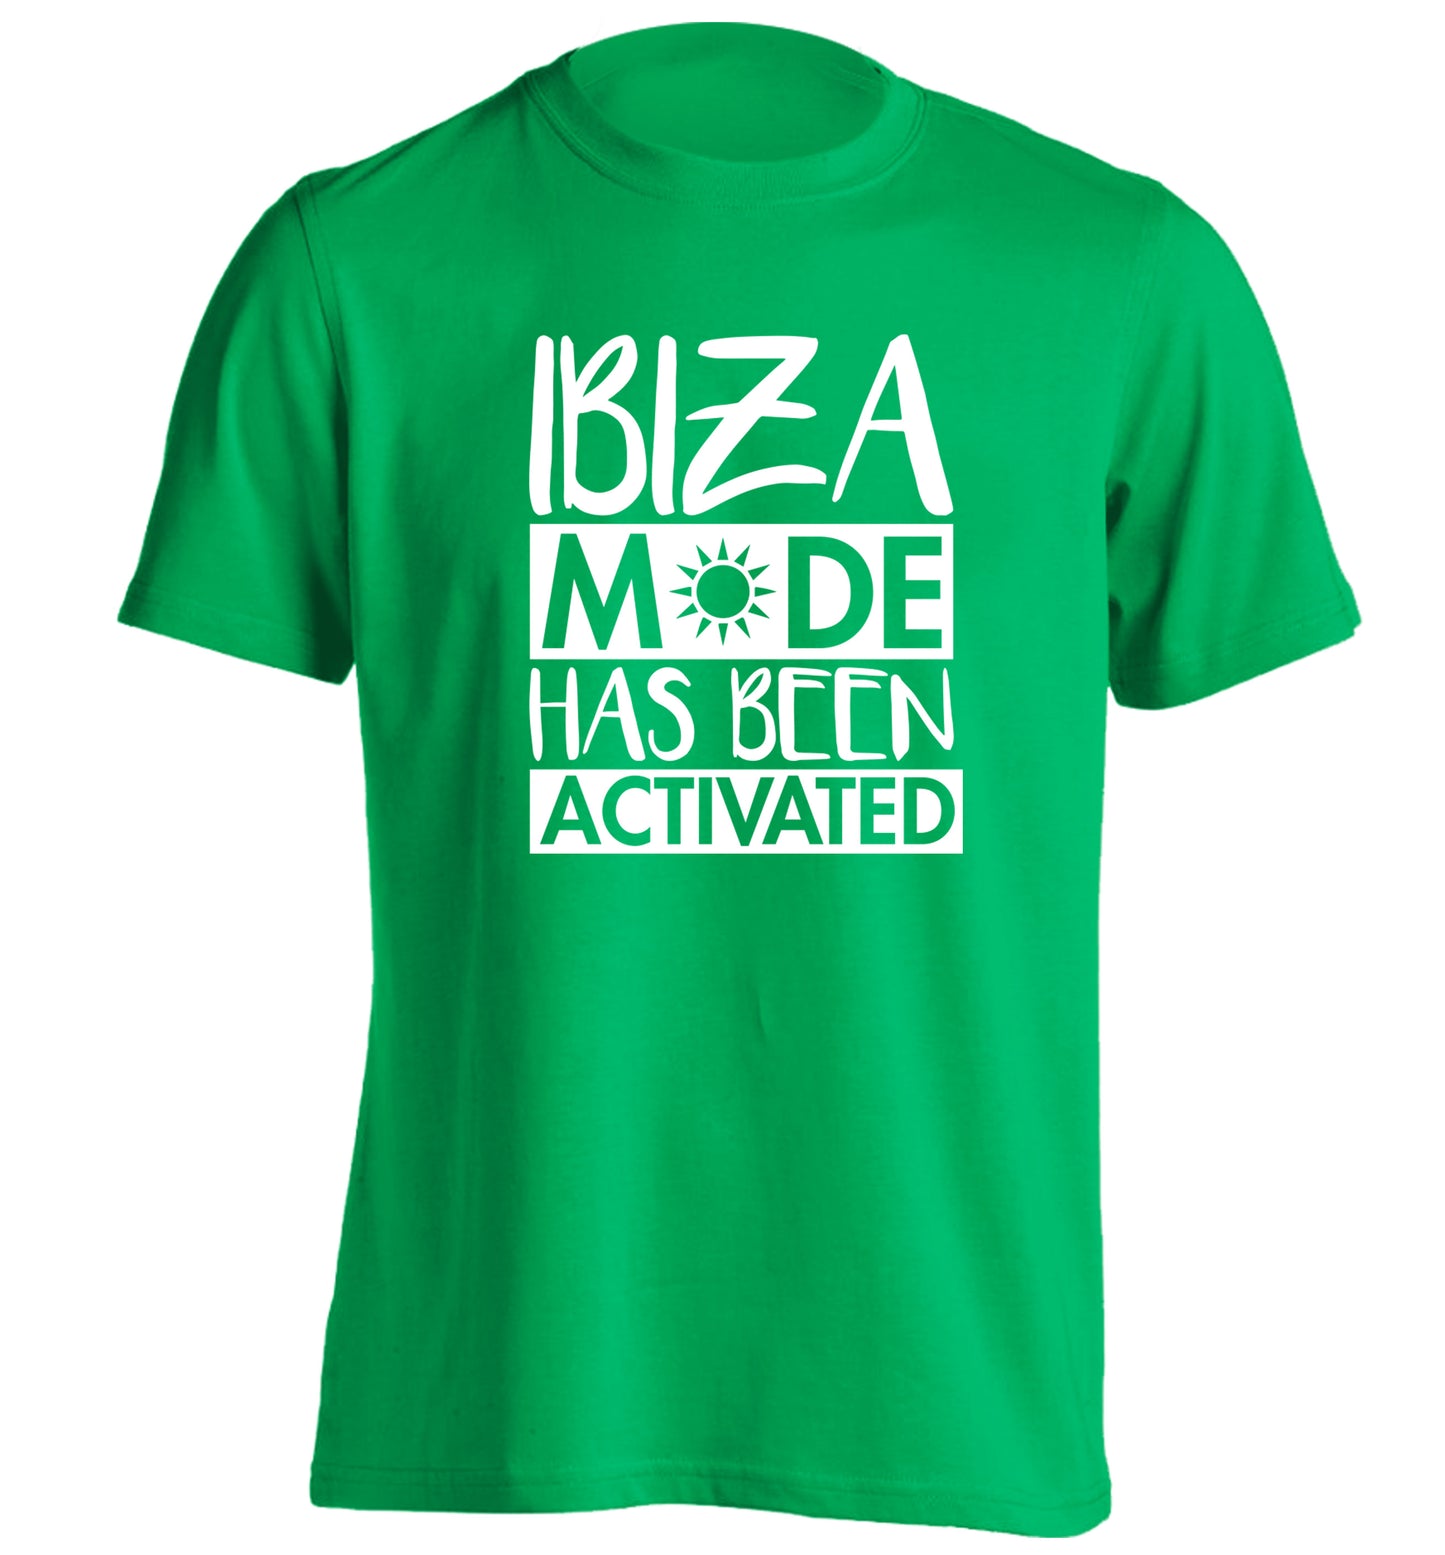 Ibiza mode has been activated adults unisex green Tshirt 2XL